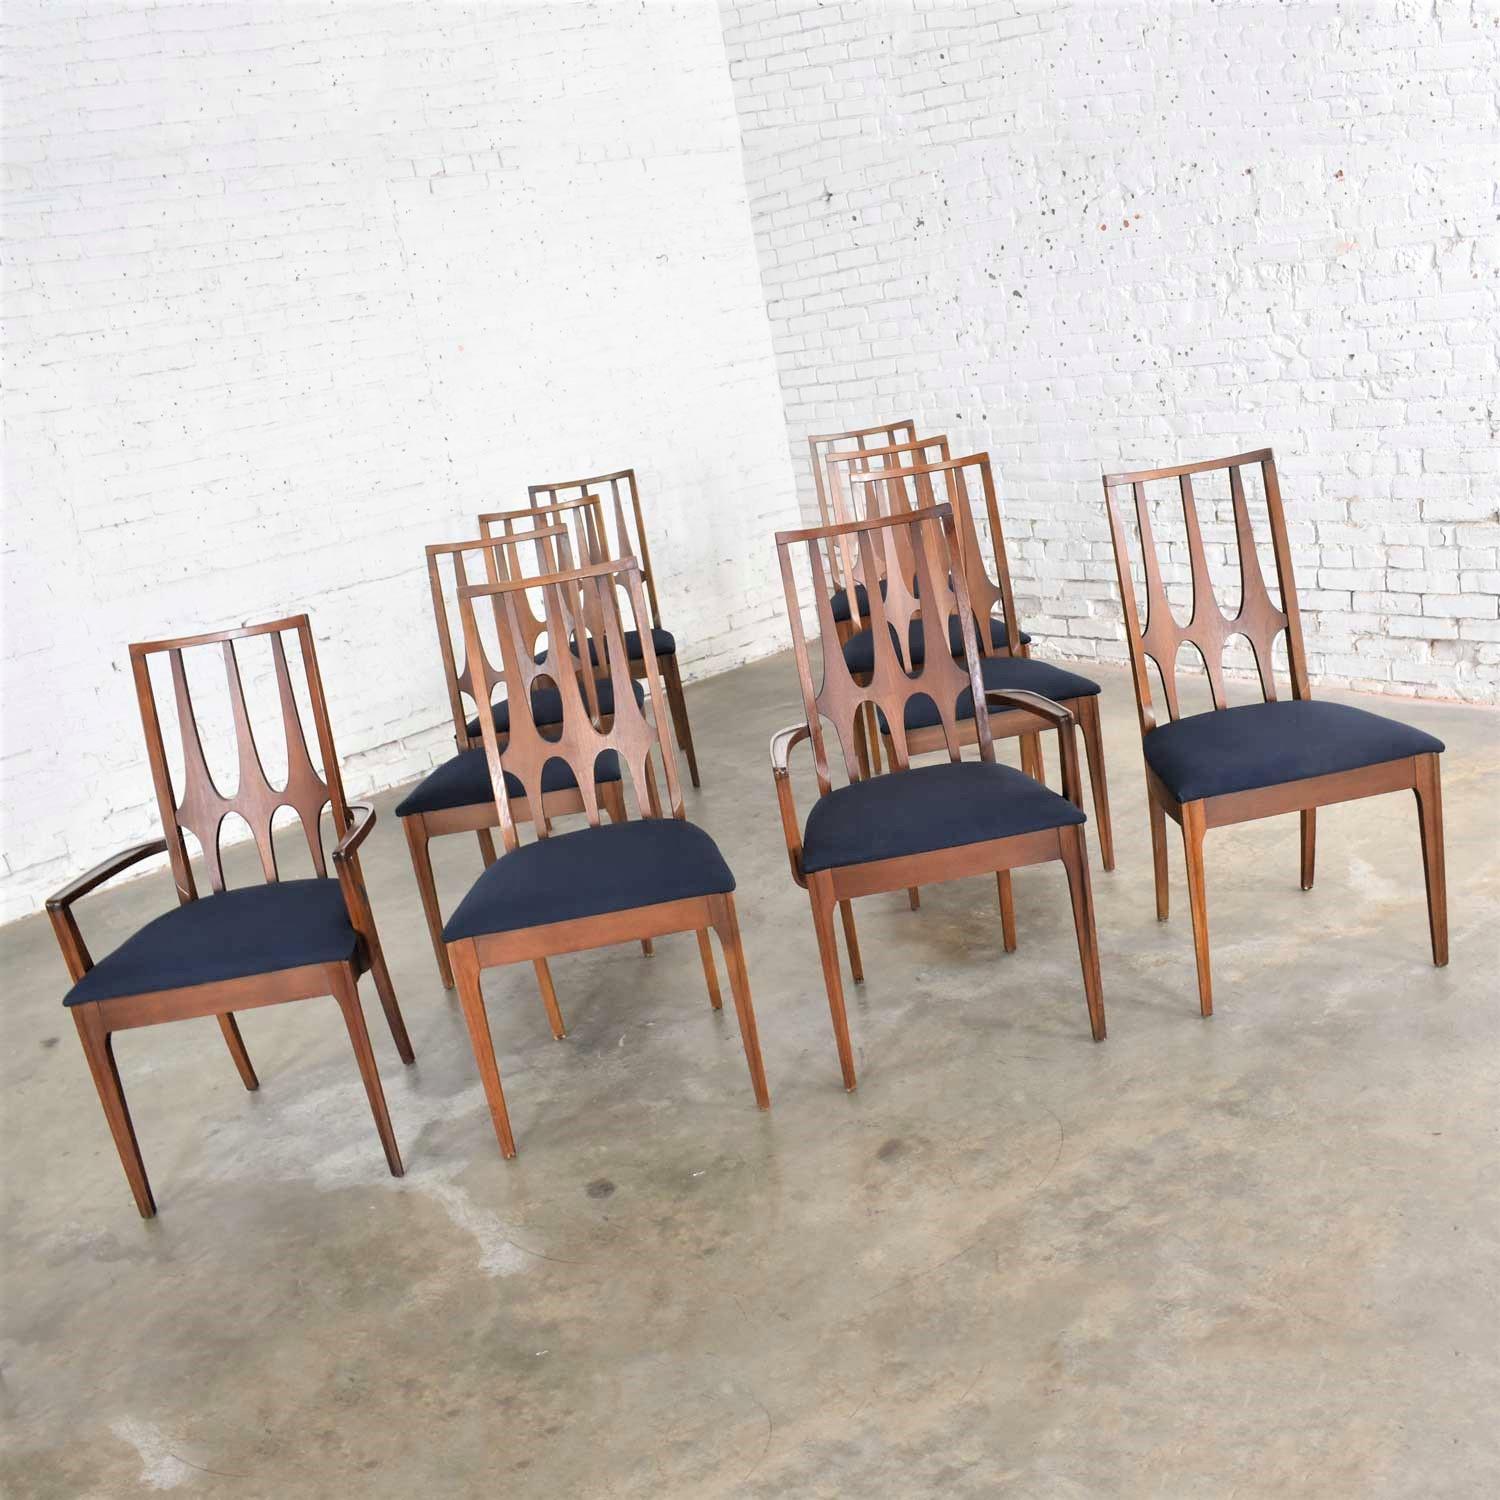 Iconic Mid-Century Modern Broyhill Brasilia original set of 10 dining chairs, 2 arm and 8 sides. Dark walnut and new dark blue/black upholstery. In fabulous vintage condition apart from one side chair that had a broken back rail that has been